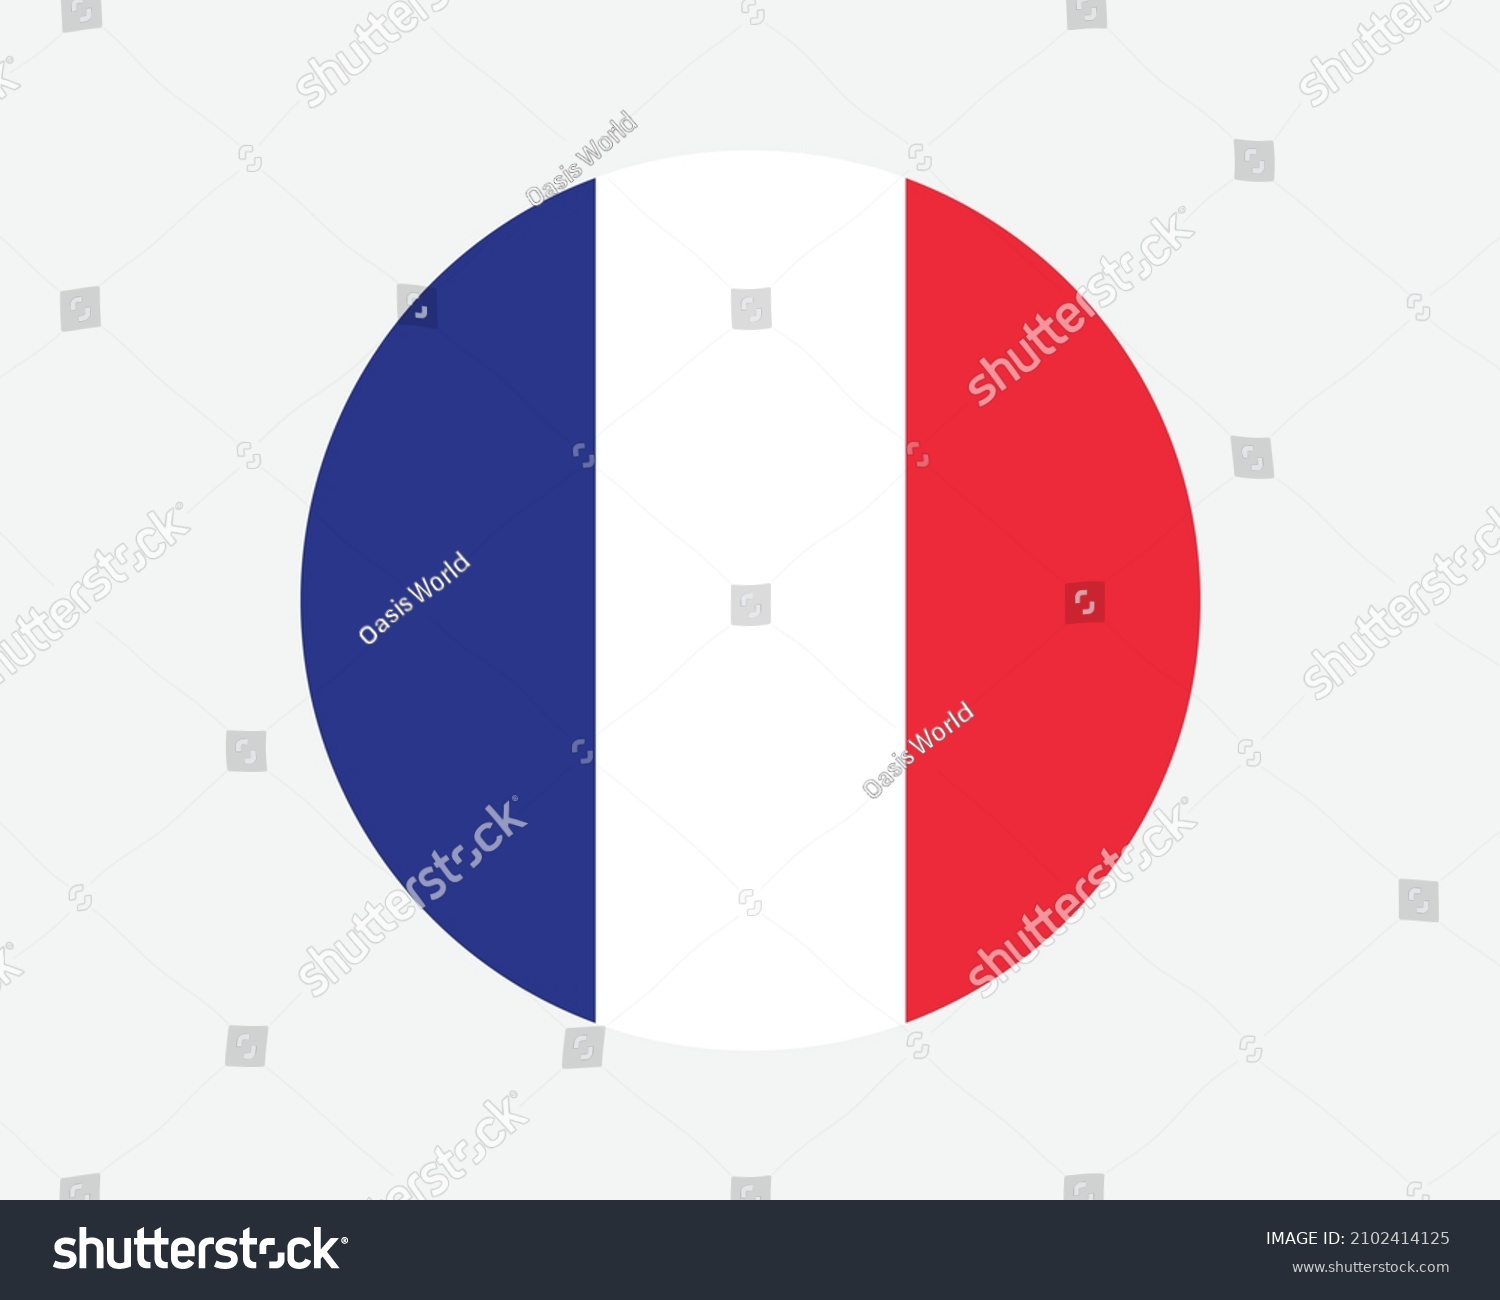 SVG of France Round Country Flag. Circular French National Flag. French Republic Circle Shape Button Banner. EPS Vector Illustration. svg